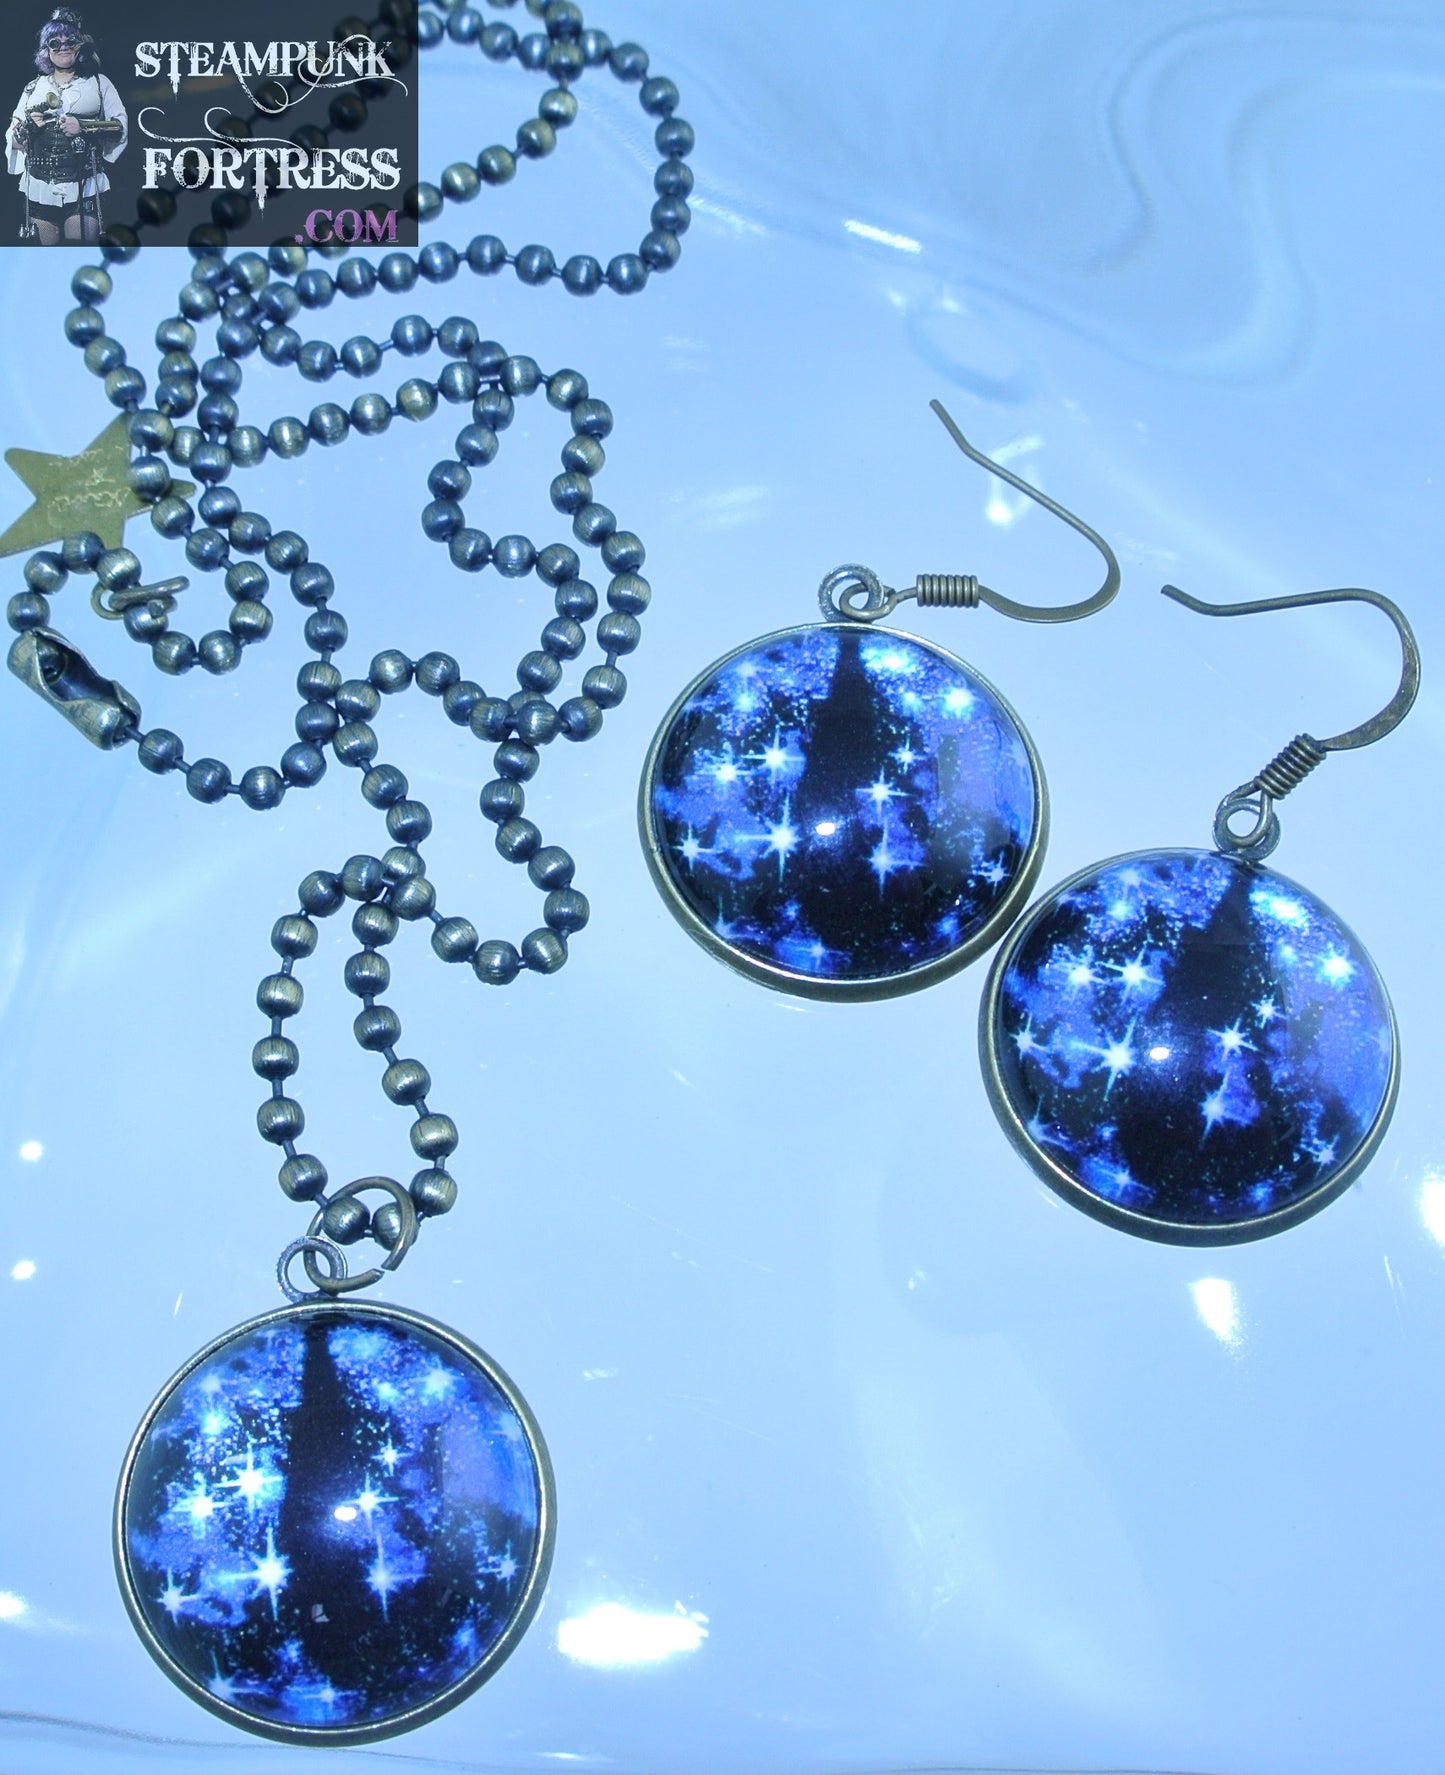 BRASS EYE BLUE WORLD IN YOUR EYES GALAXY BLACK CAT DRAGON LIZARD PUPIL 20MM NECKLACE SET AVAILABLE HALLOWEEN COSPLAY COSTUME STARR WILDE STEAMPUNK FORTRESS